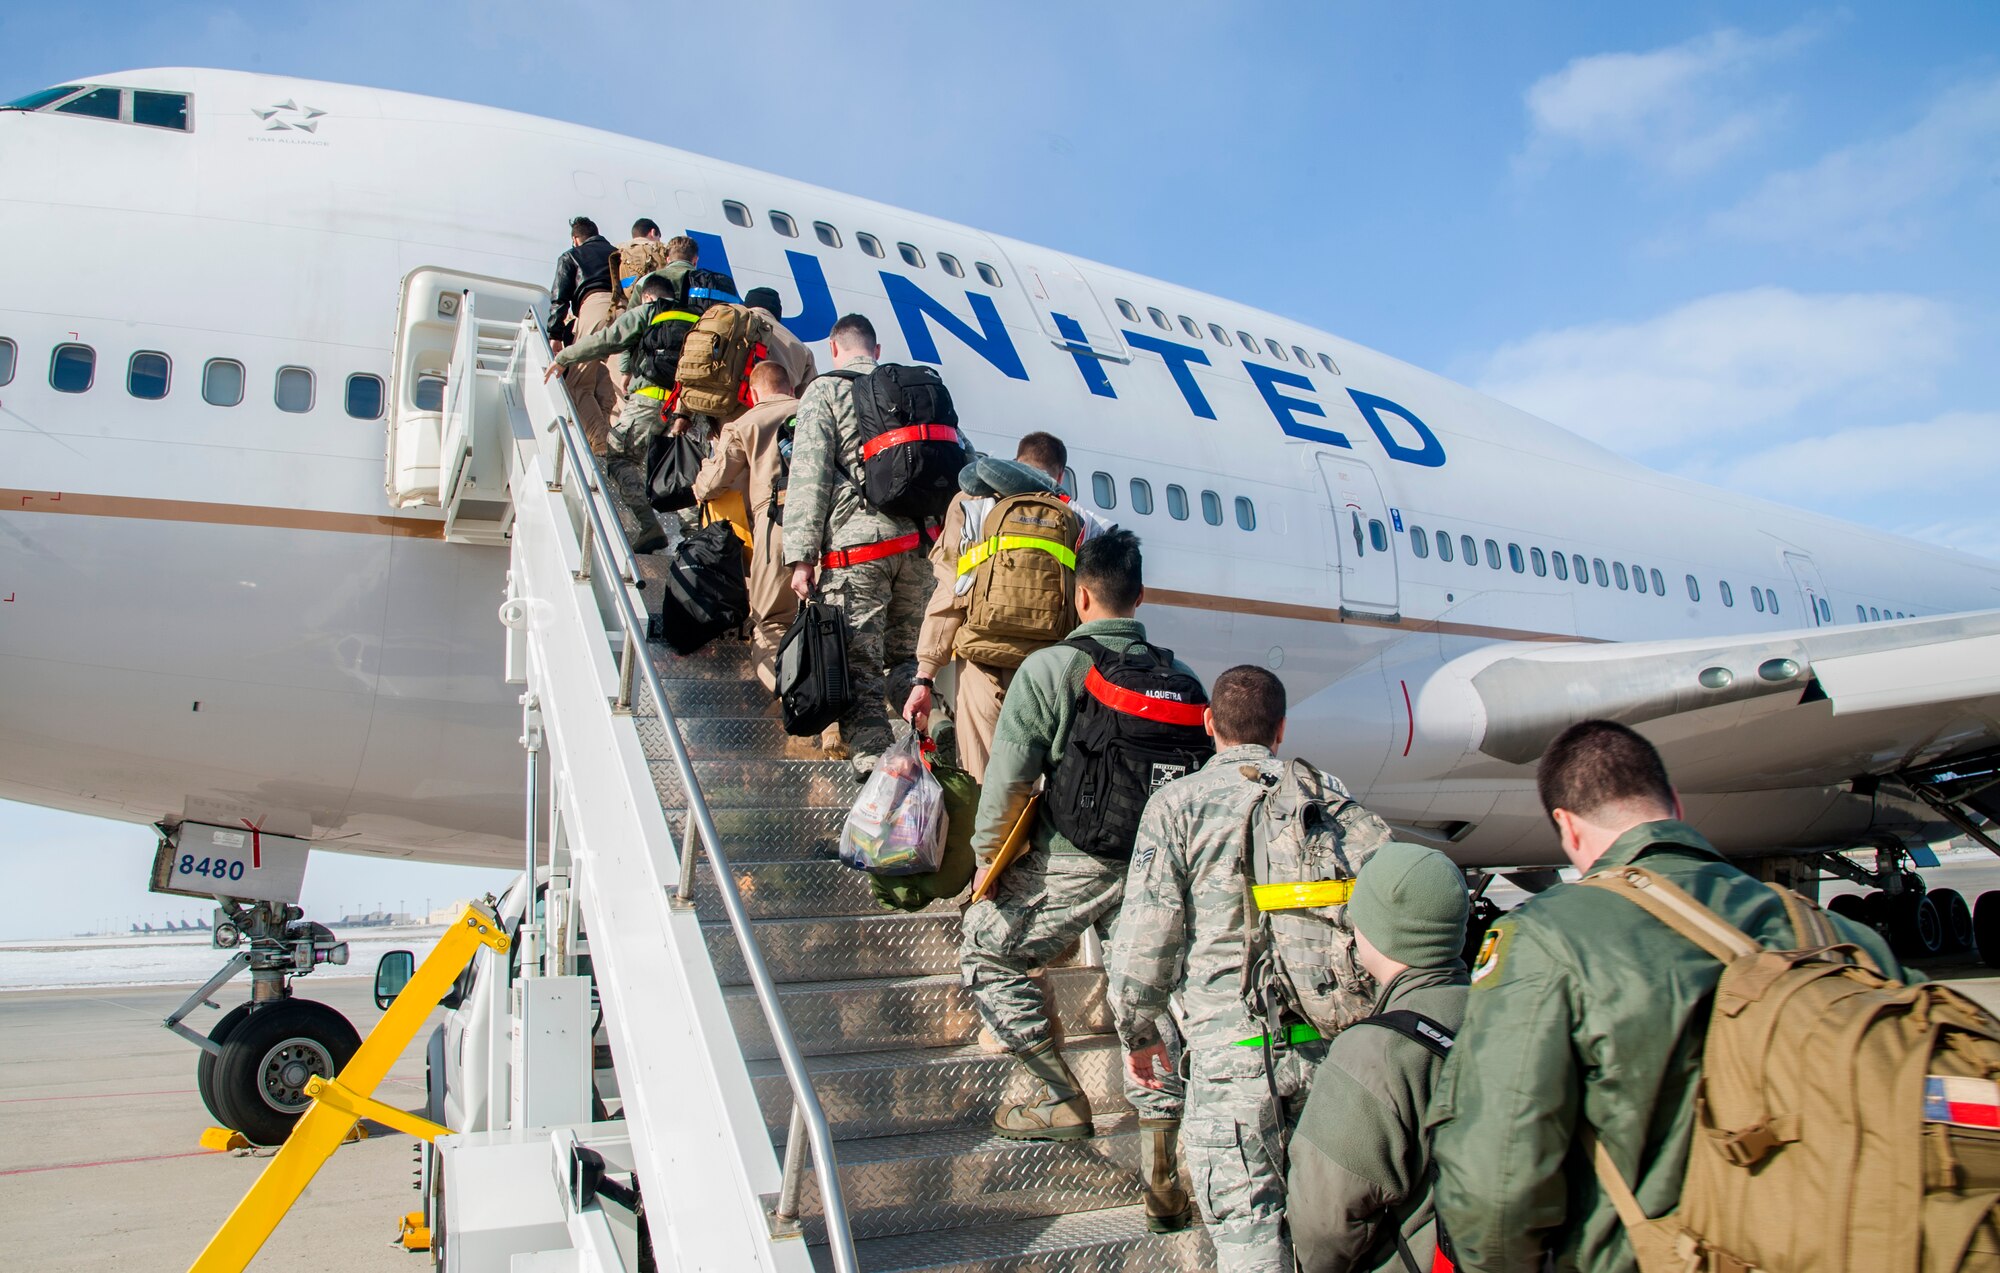 Minot Airmen board a plane during a mass deployment at Minot Air Force Base, N.D., March 9, 2017. Airmen deploy to assure allies, deter adversaries and defeat our enemies. (U.S. Air Force photo/Senior Airman Christian Sullivan)